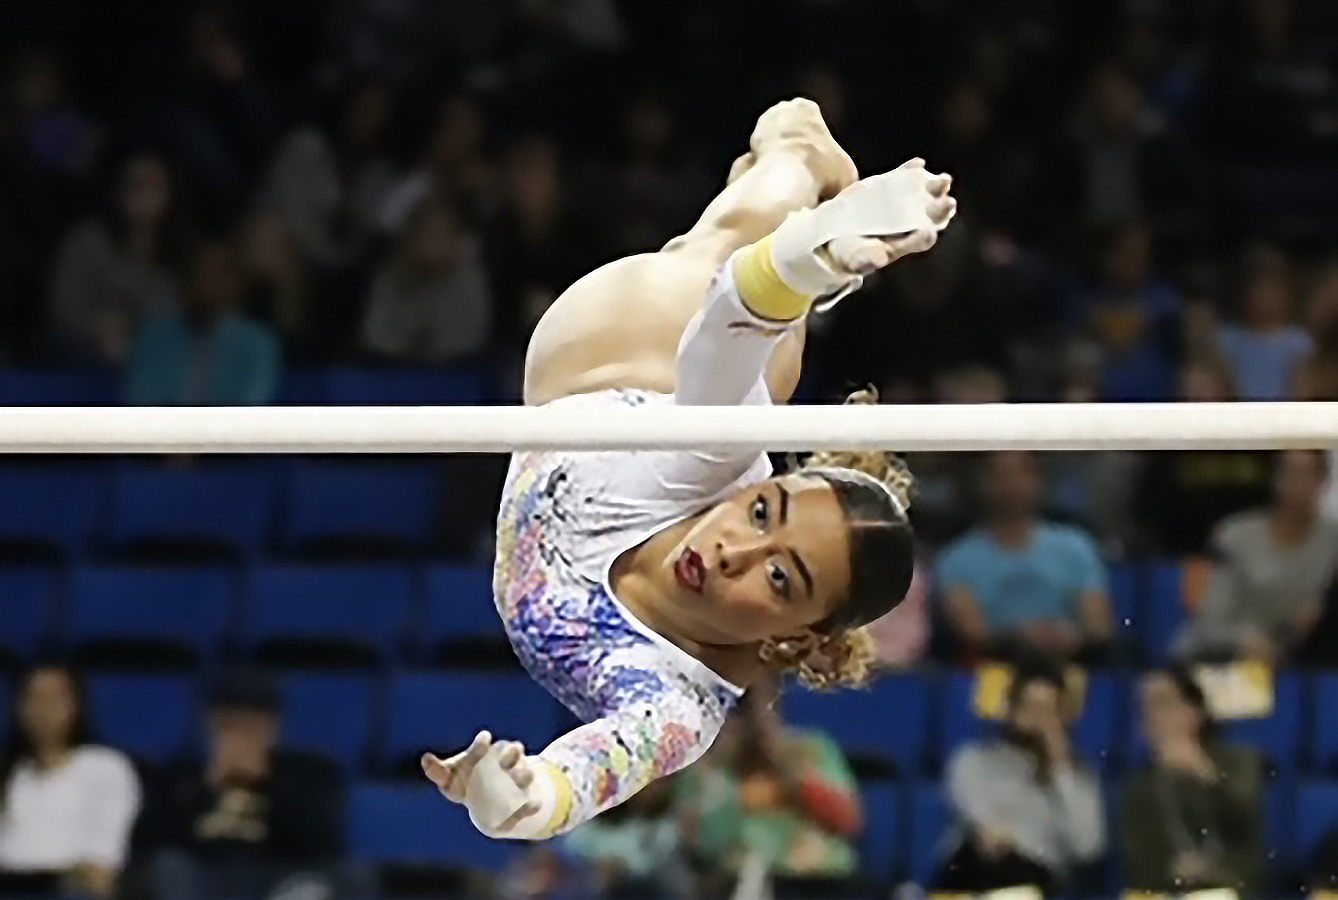 Margzetta Frazier, a gymnast at UCLA, performs on the uneven bars.